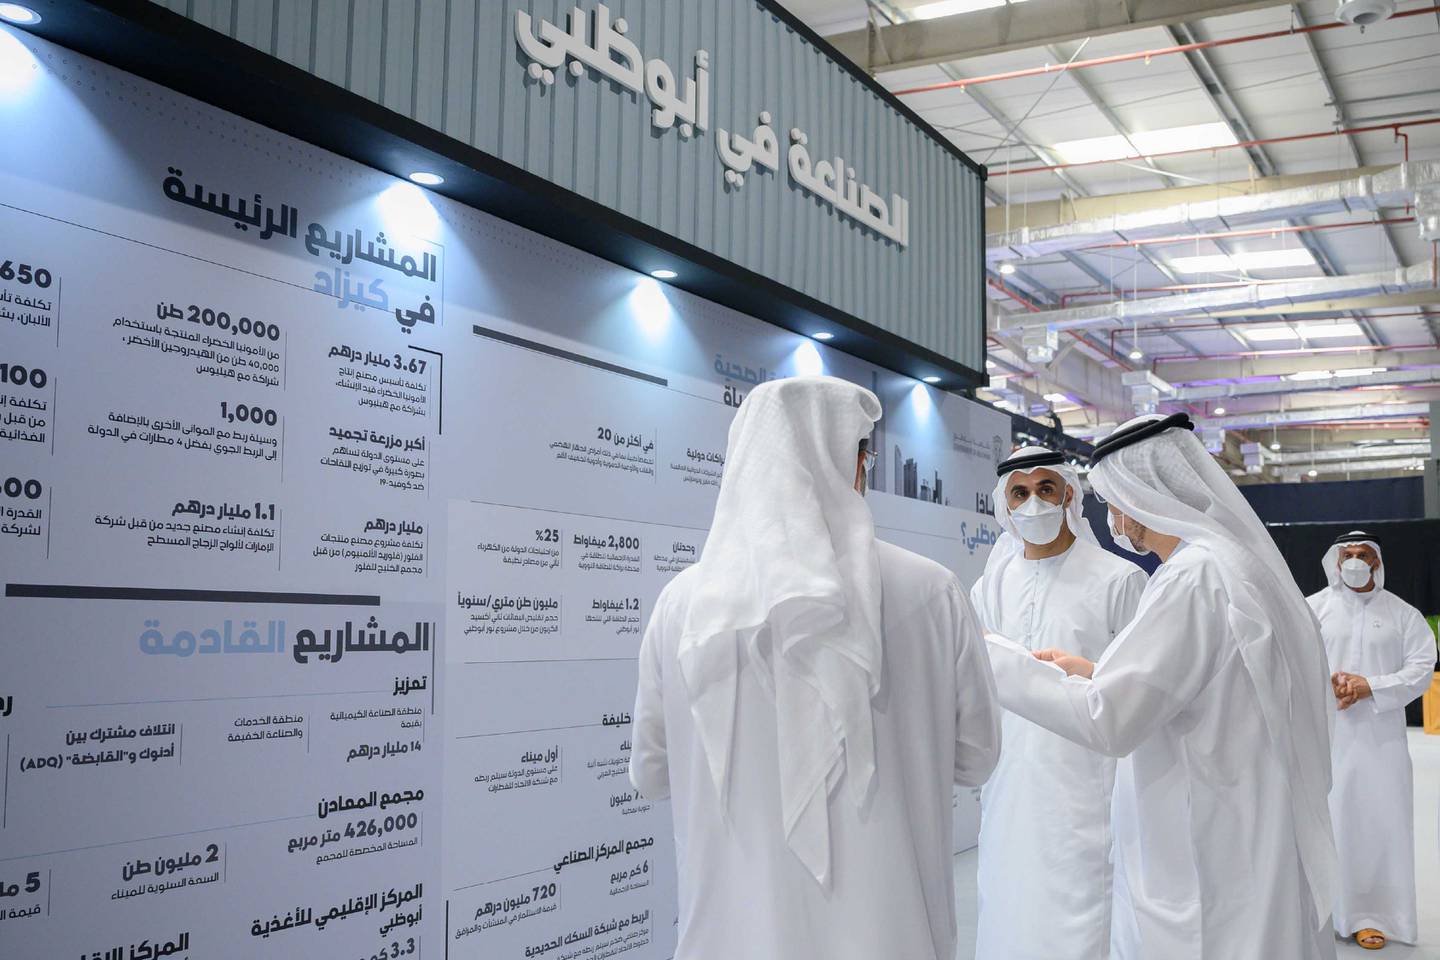 Sheikh Khaled Bin Mohamed, member of the Abu Dhabi Executive Council and chairman of the Abu Dhabi Executive Office, has launched the Abu Dhabi Industrial Strategy. Photo: Abu Dhabi Government Media Office